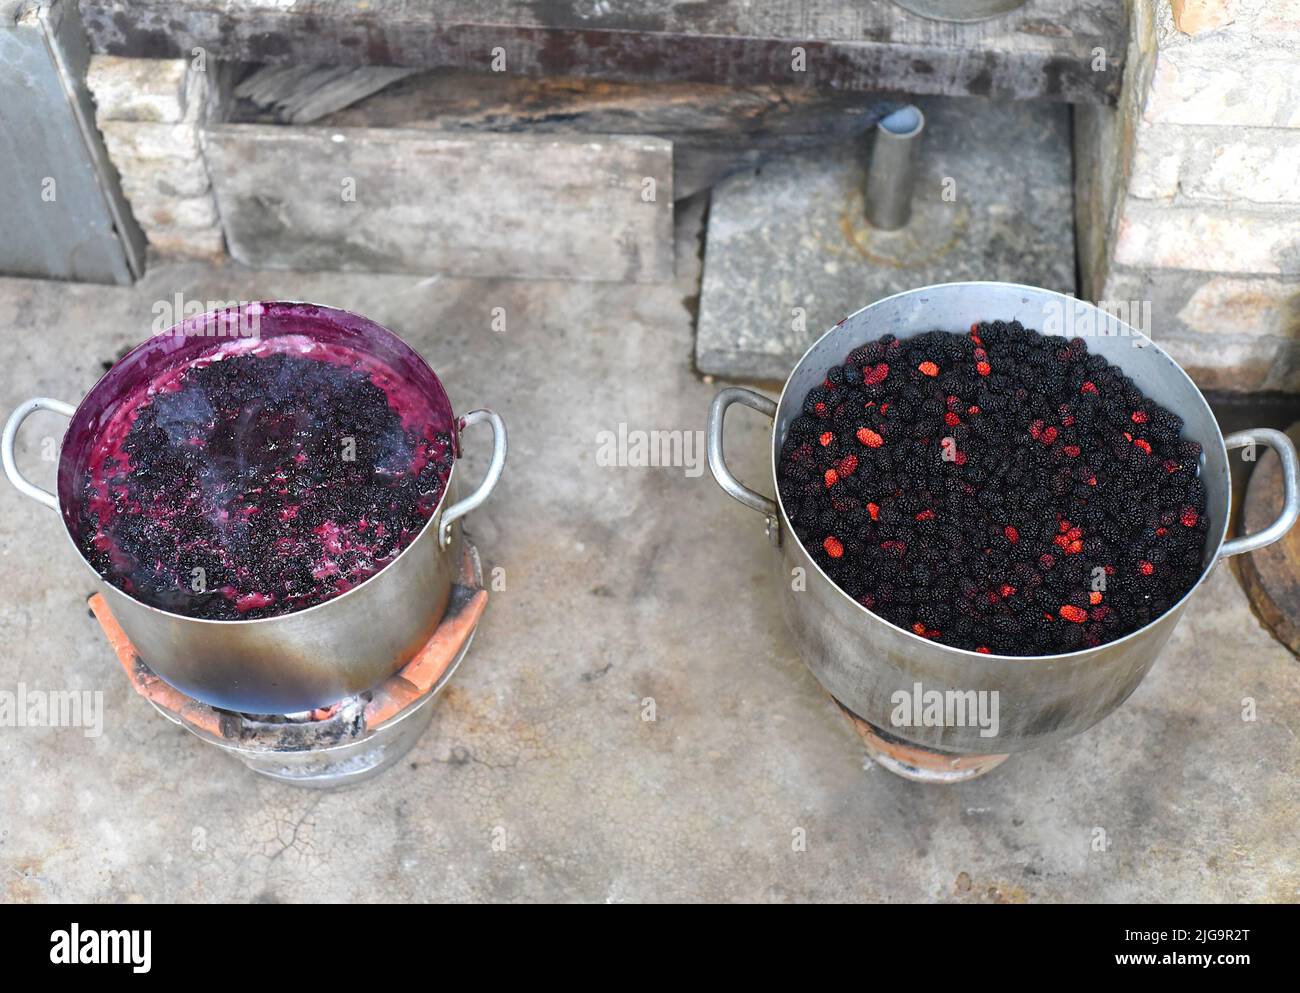 Boiling mulberry jam in a metal saucepan on open fire Stock Photo